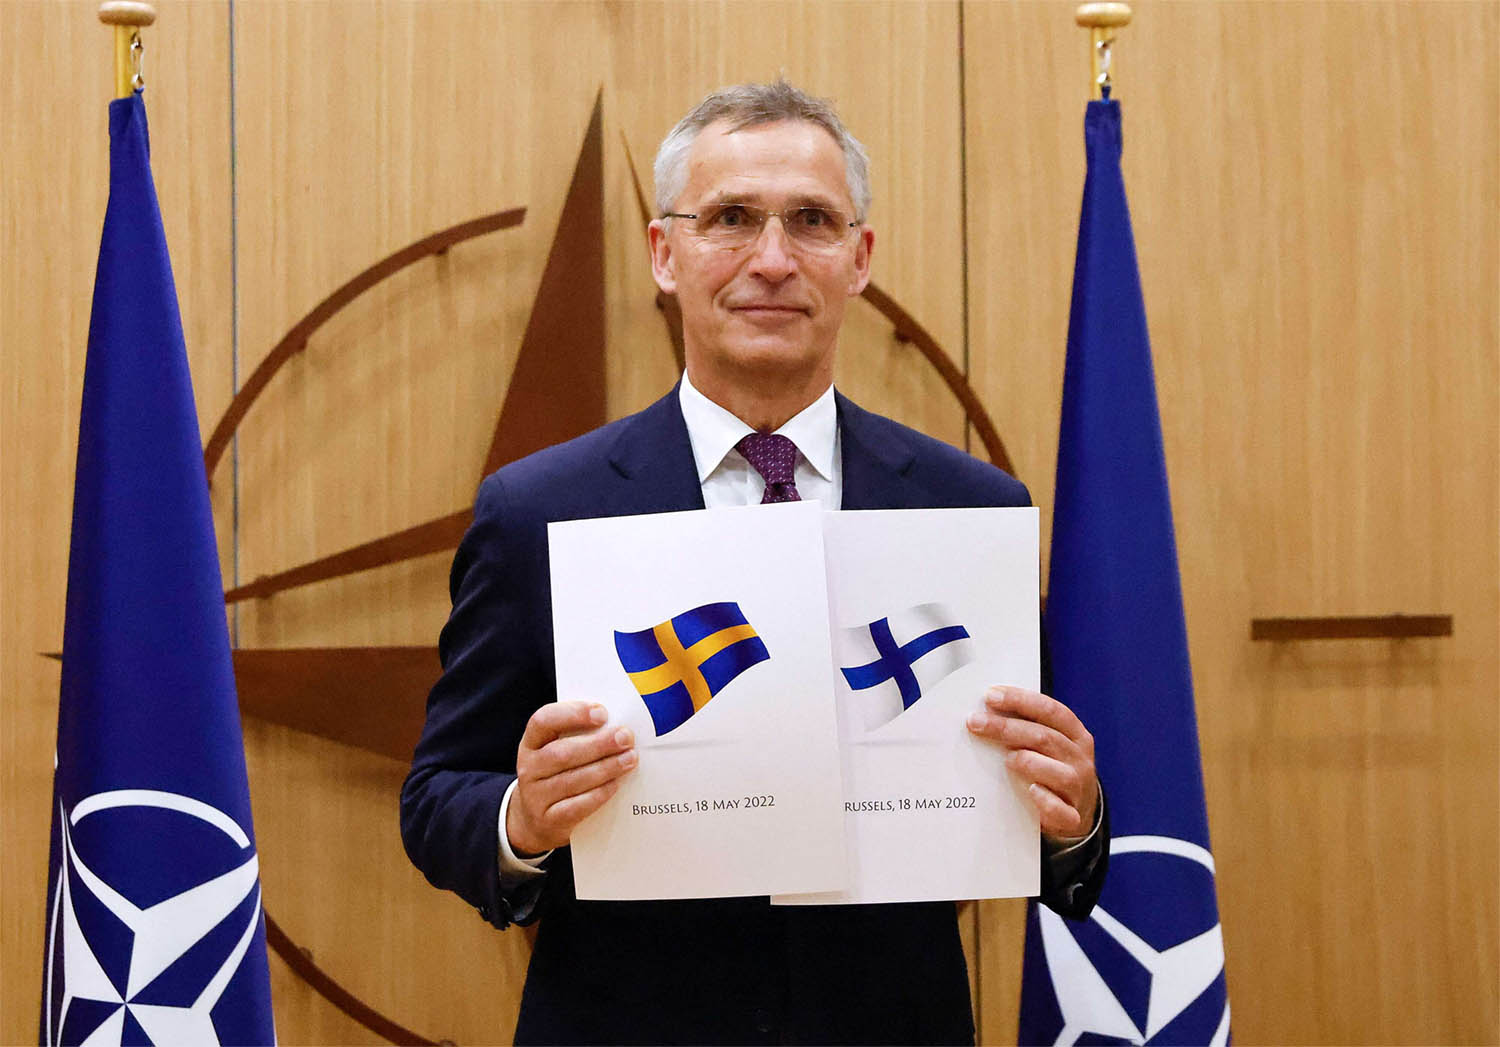 Objections from Turkey could delay Finland's and Sweden’s accession to NATO for months